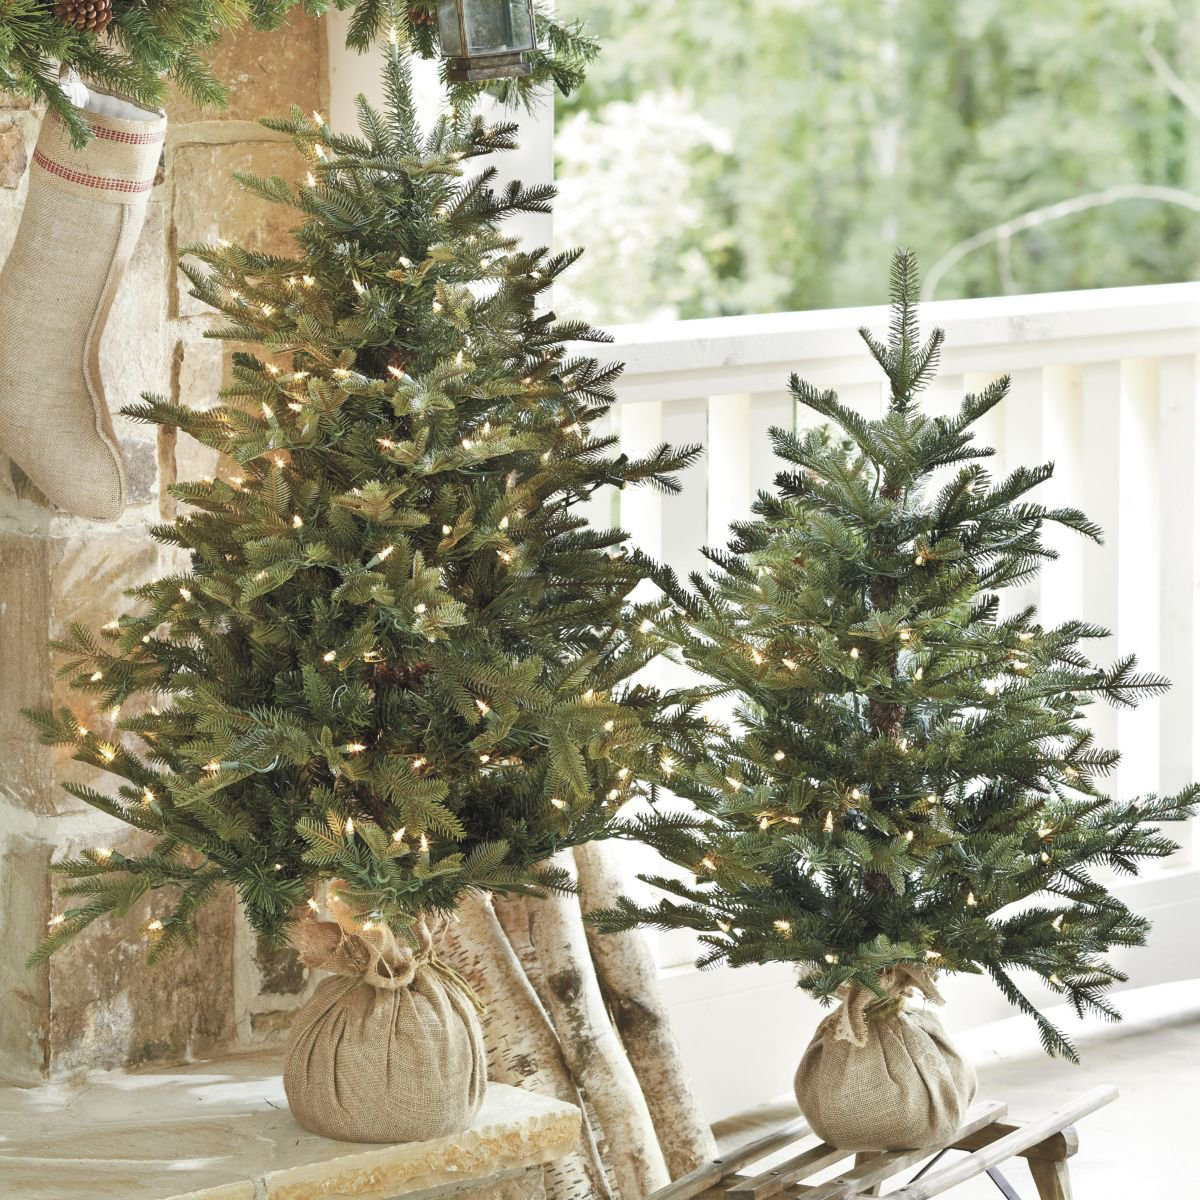 Prelit Table Top Christmas Trees
 Get the Joyful Christmas Nuance in Your Home by Decorating